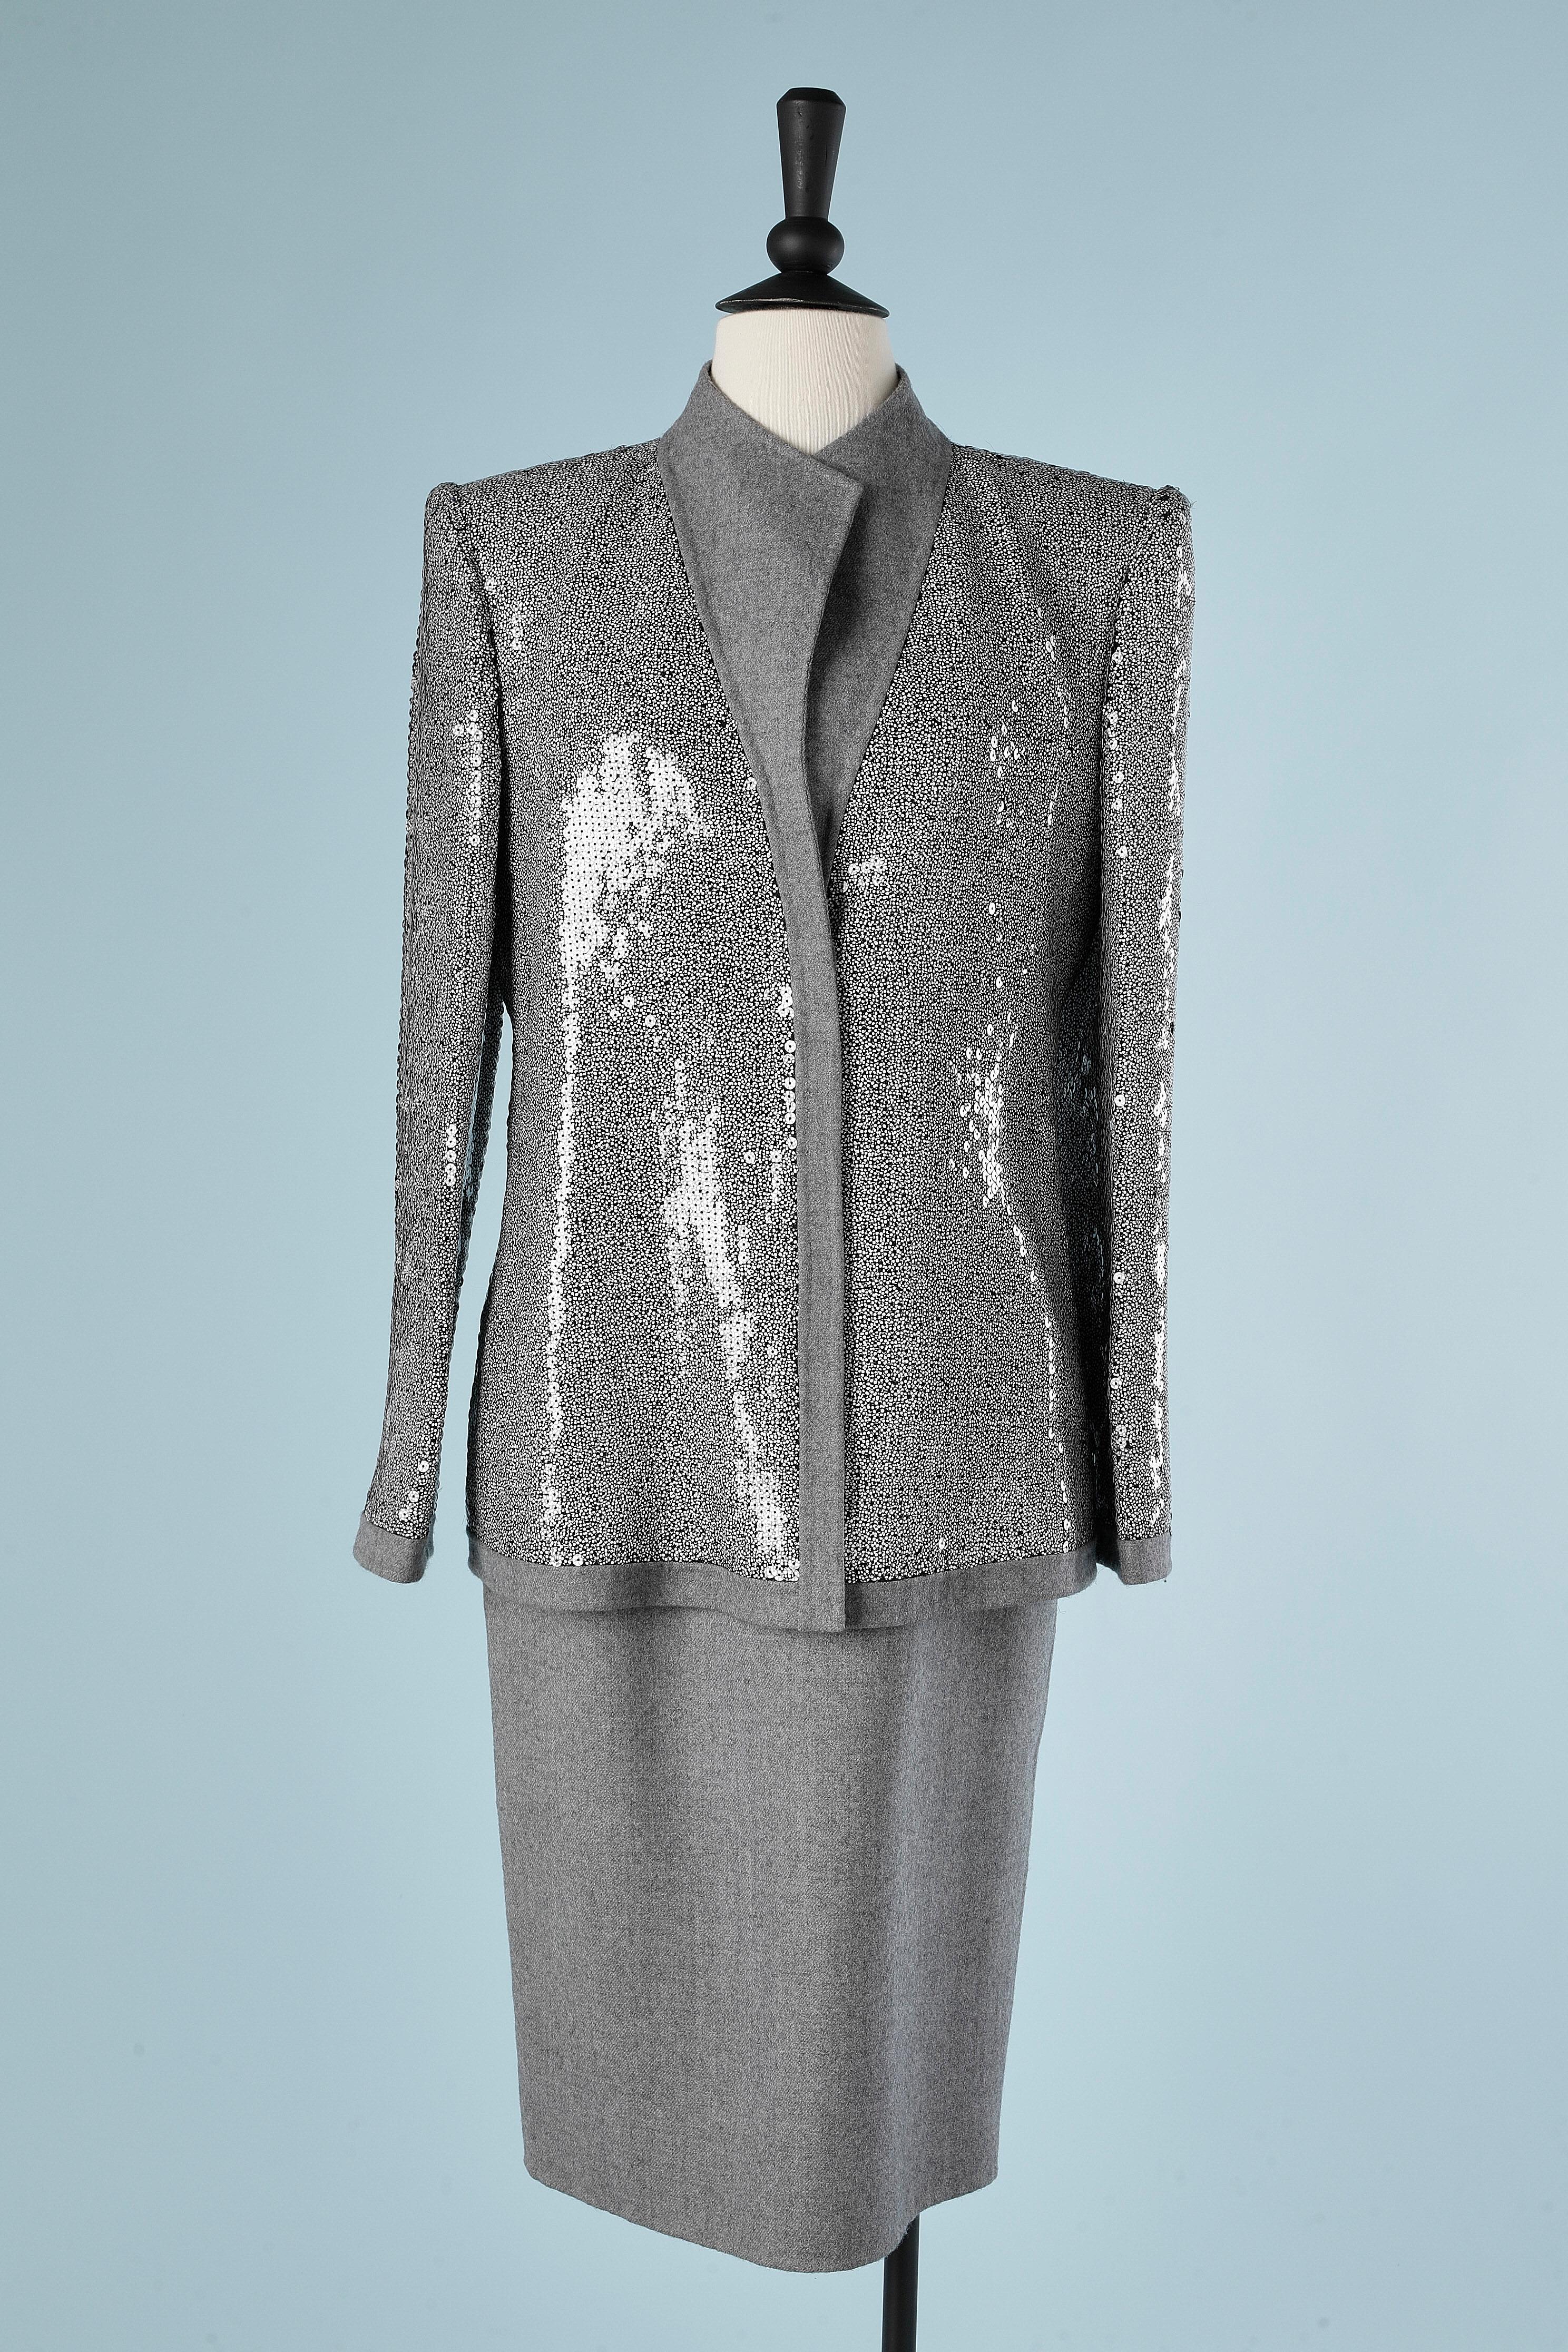 Skirt suit in grey wool and black&white sequin. Rayon lining. 
Numbered.
SIZE M